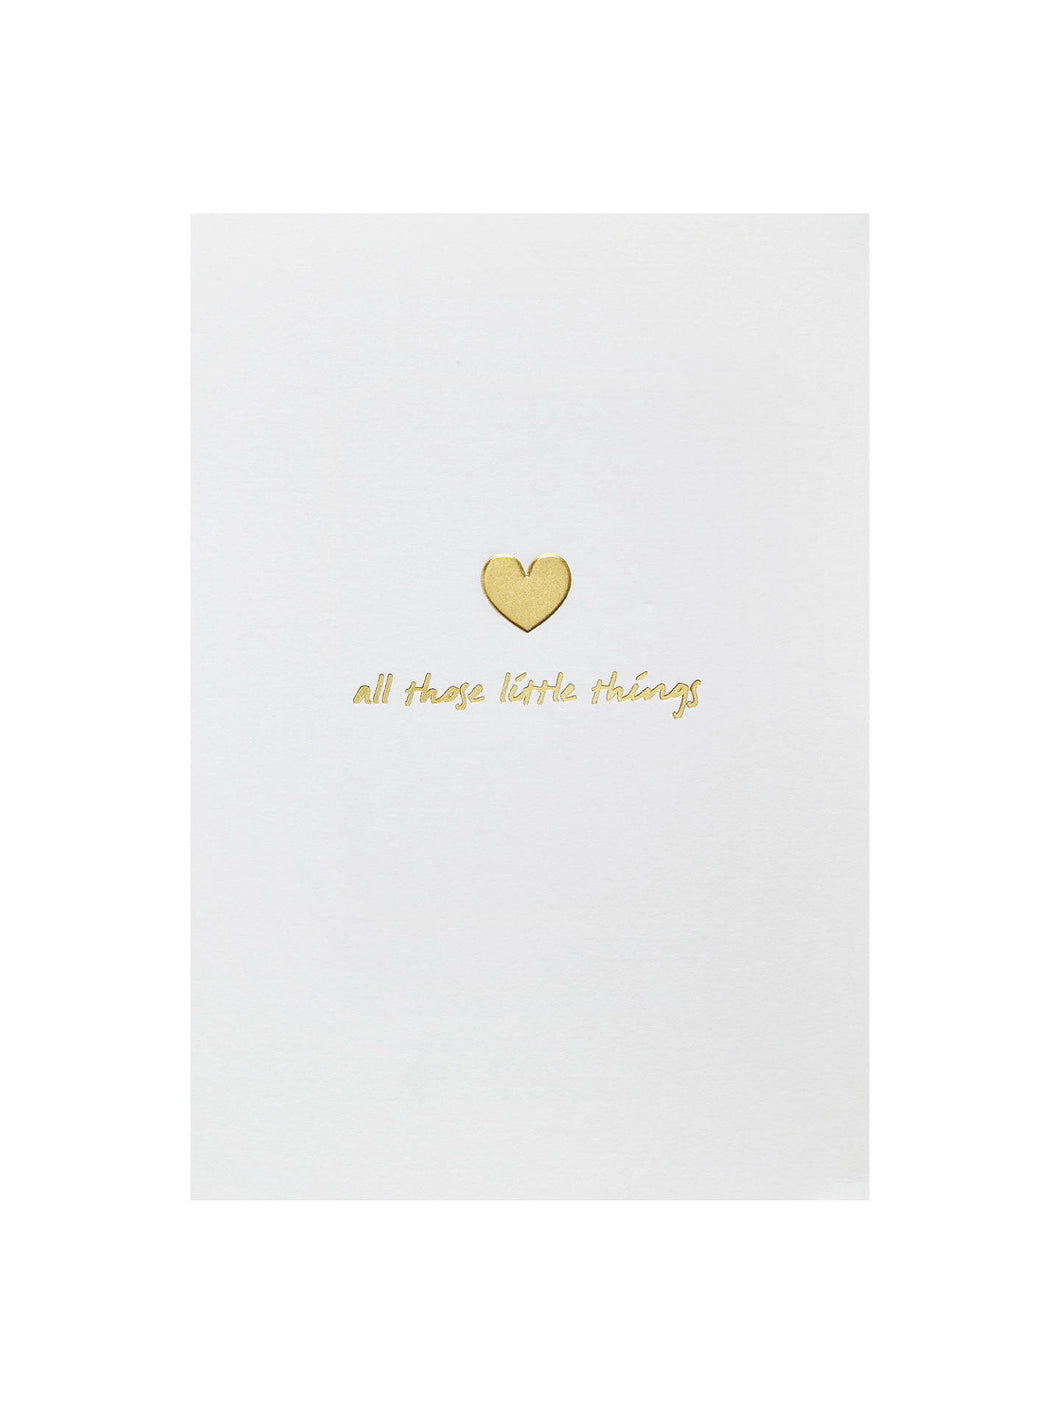 All those little things - Greeting Card